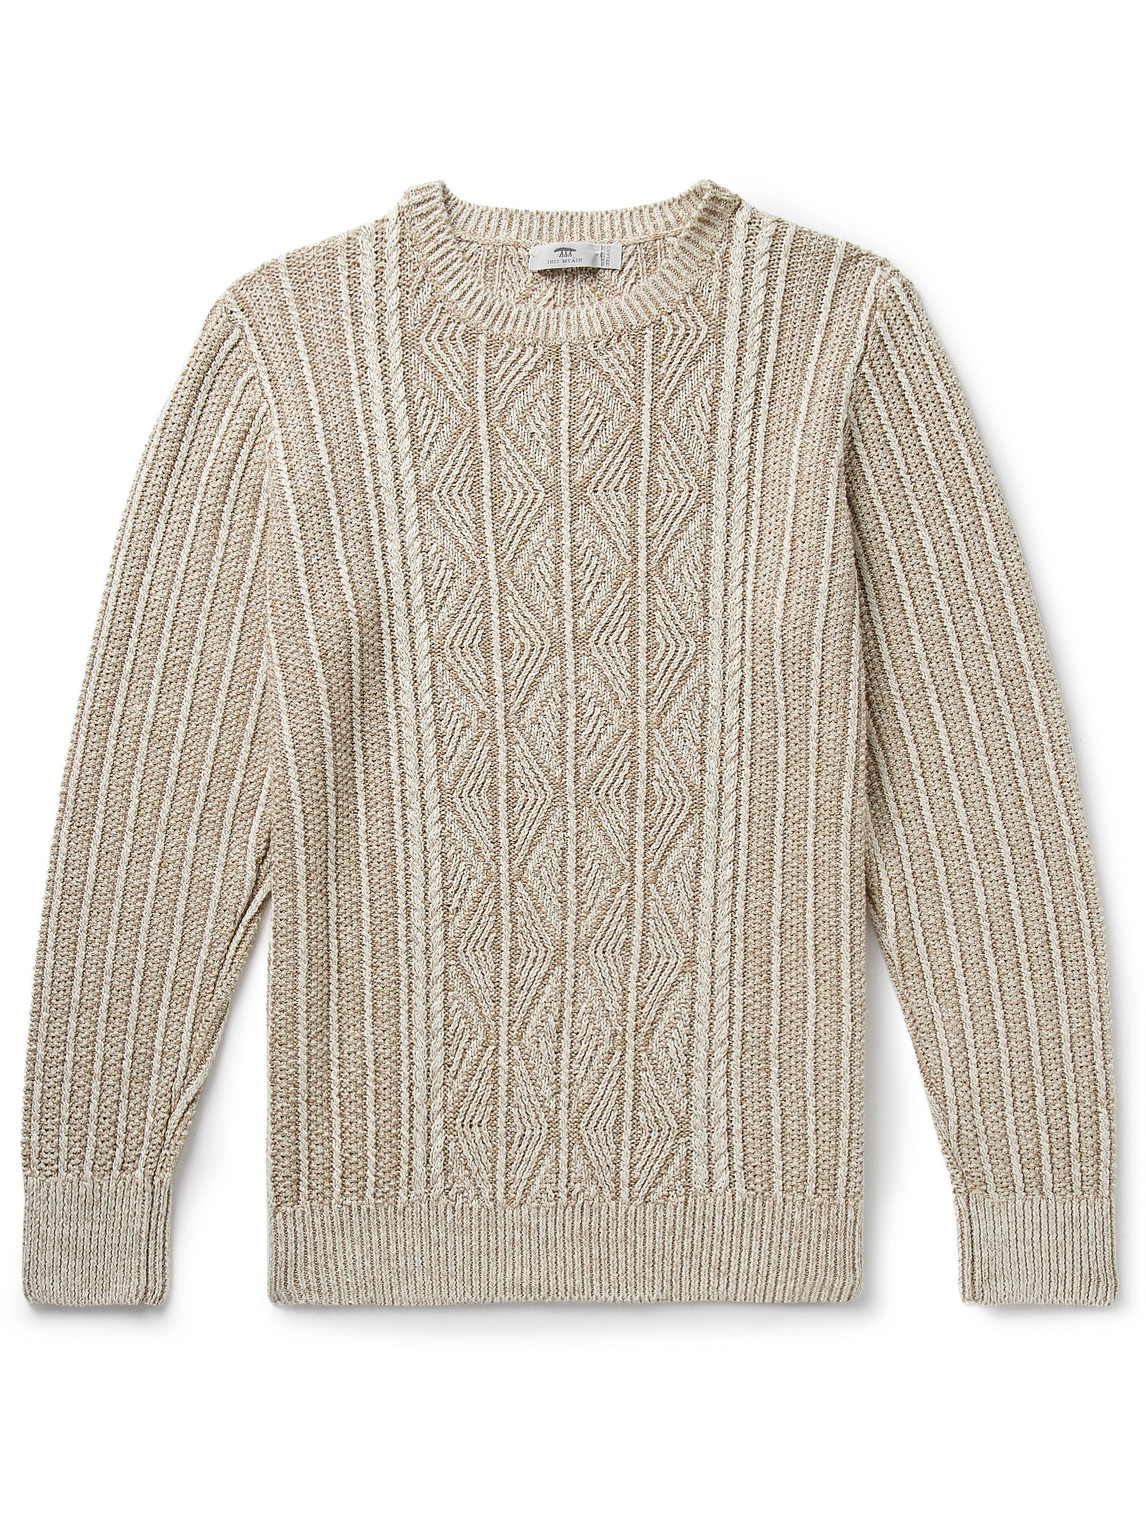 Inis Meain Aran Cable-knit Linen Jumper In Neutrals